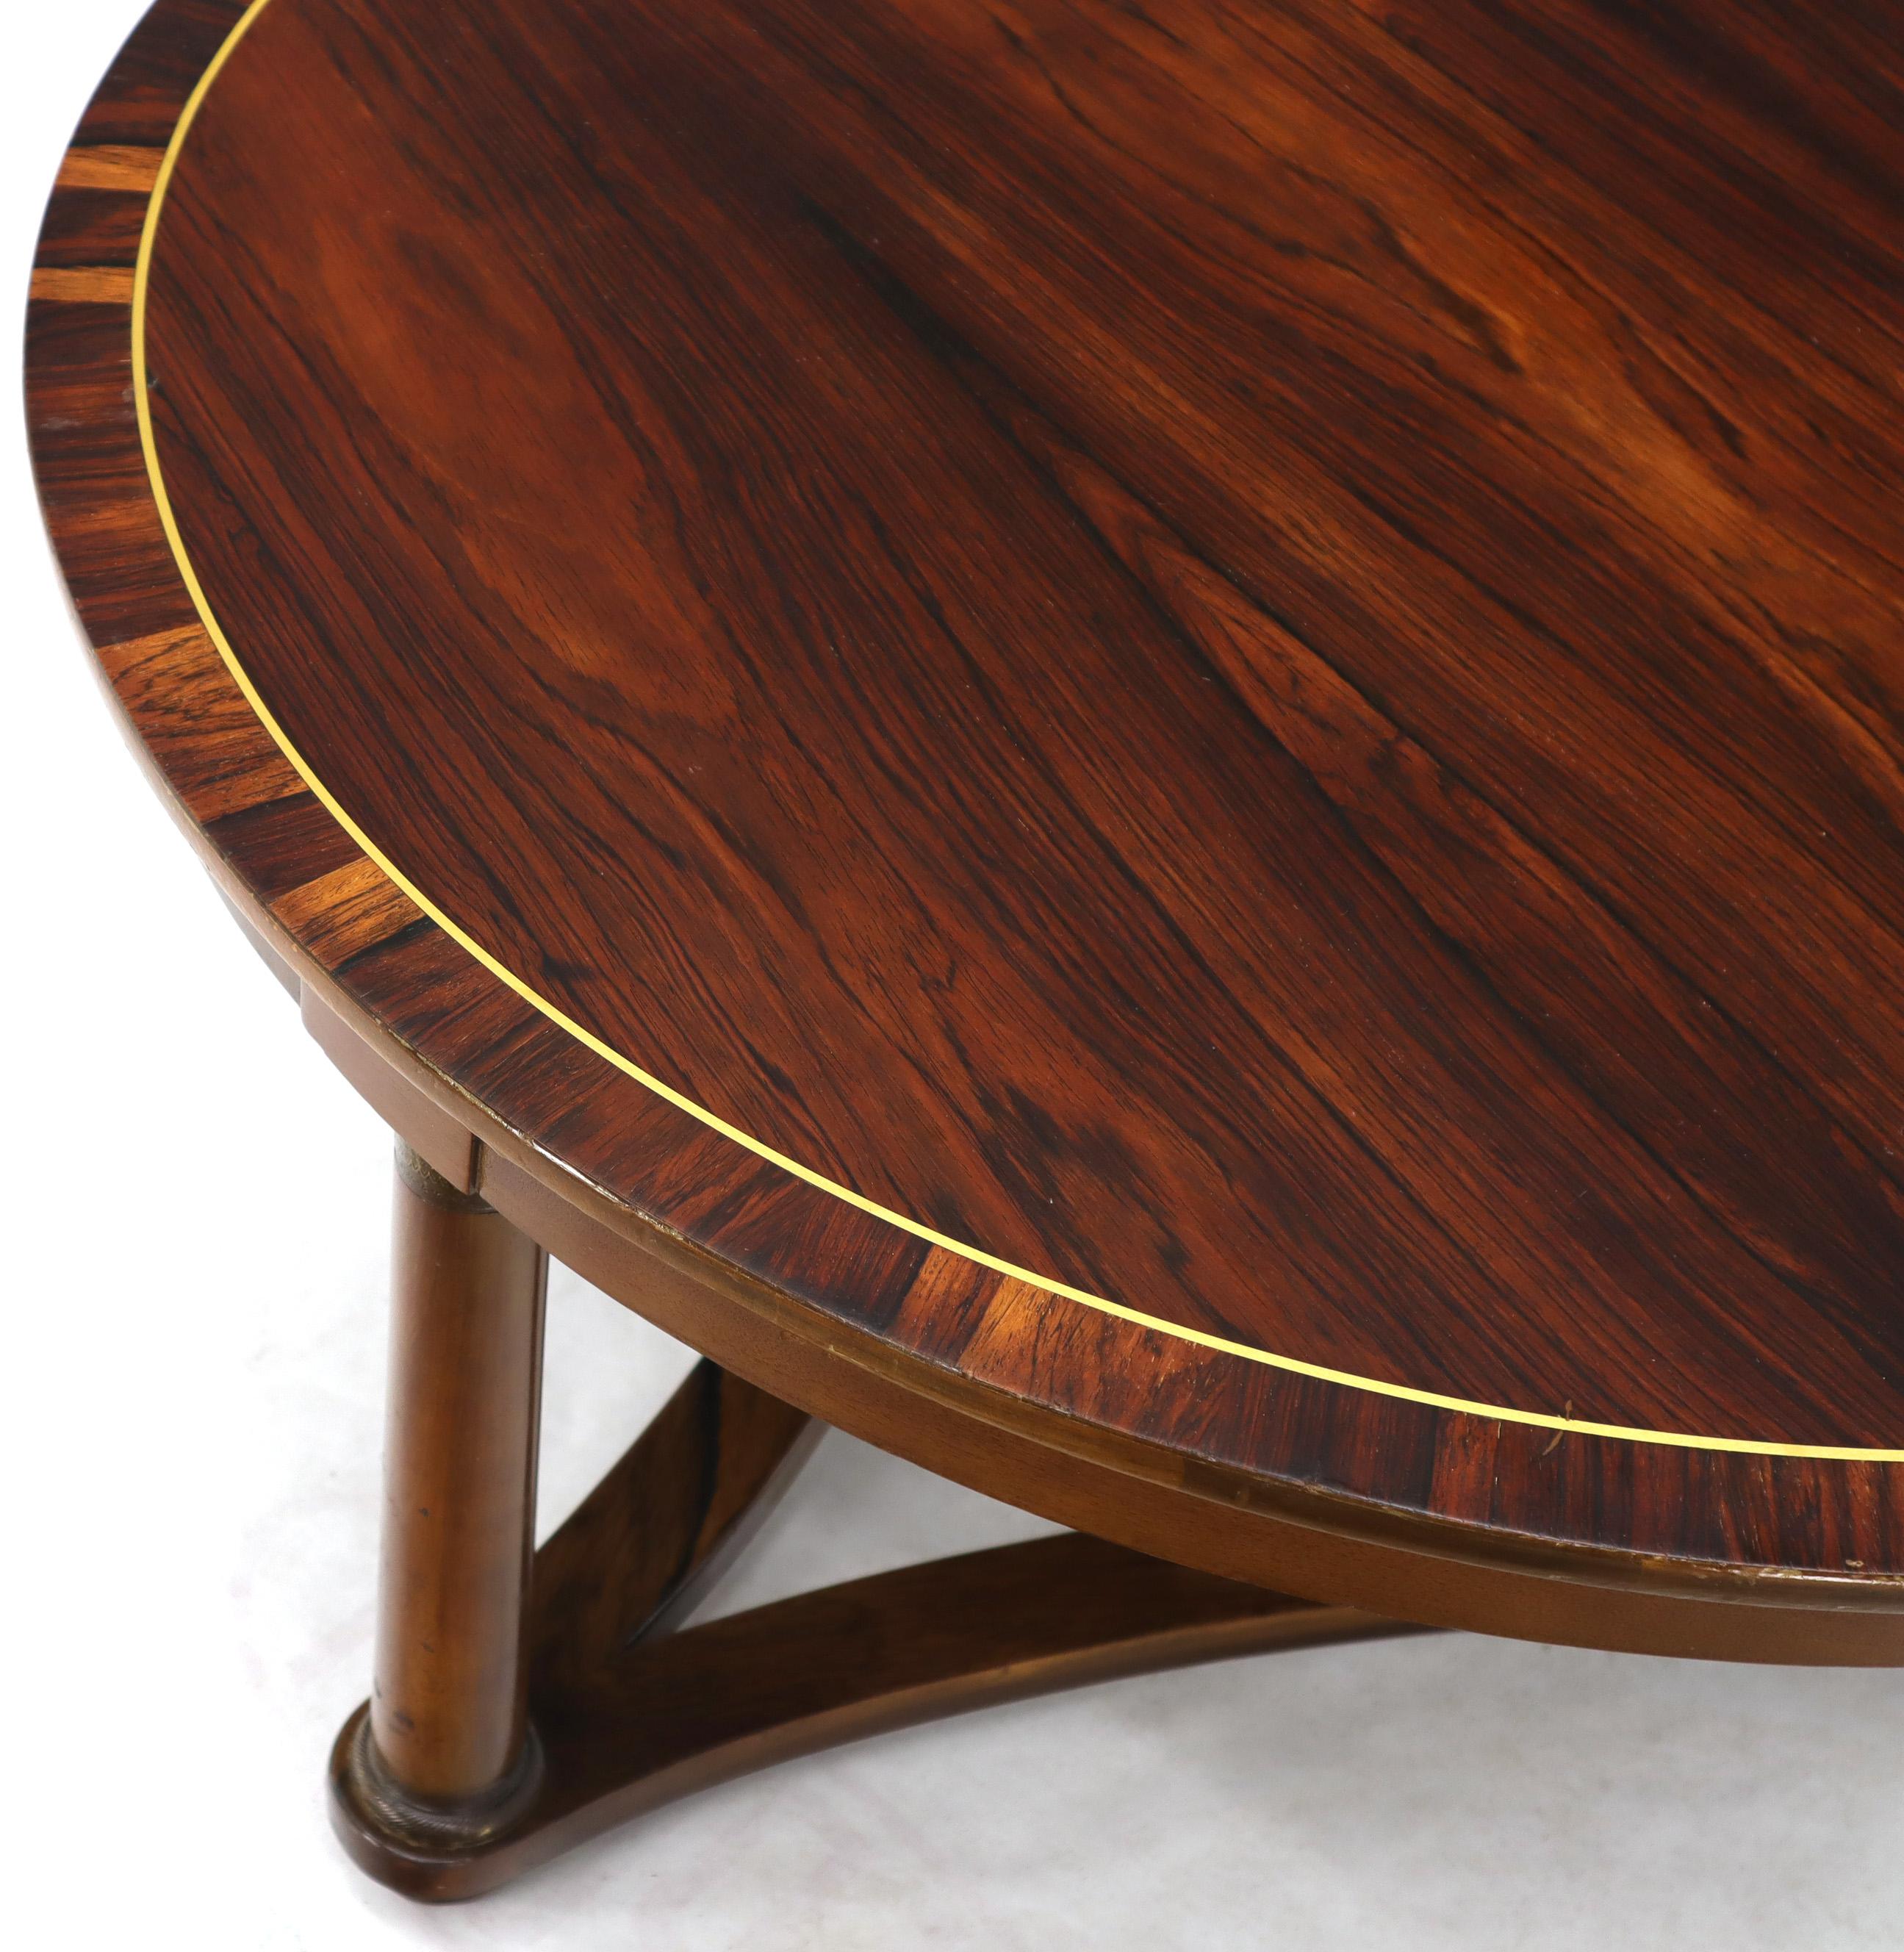 Sharp looking neoclassical almost Mid-Century Modern Danish design banded rosewood coffee cocktail table. Unsigned possibly Baker or similar grade manufacturer.